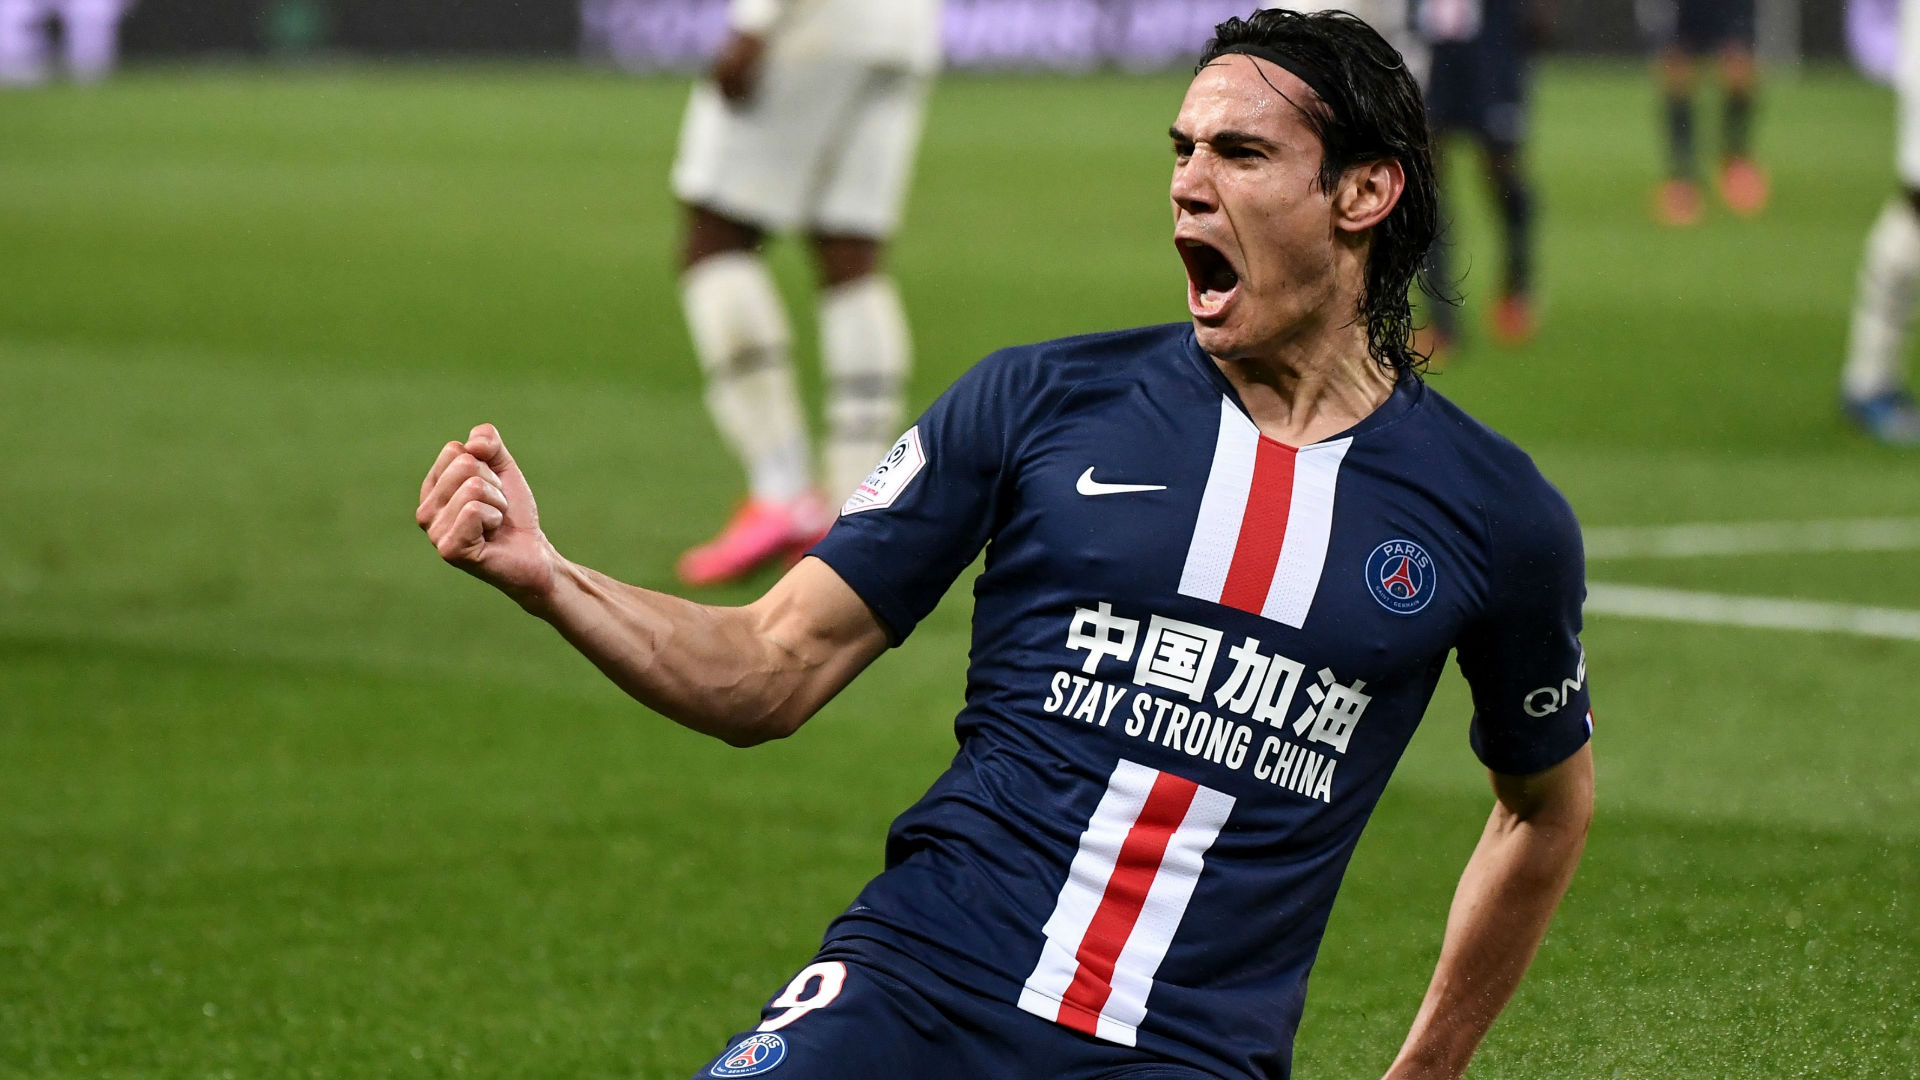 Cavani Becomes First Psg Player To Score 0 Goals For The Club Goal Com